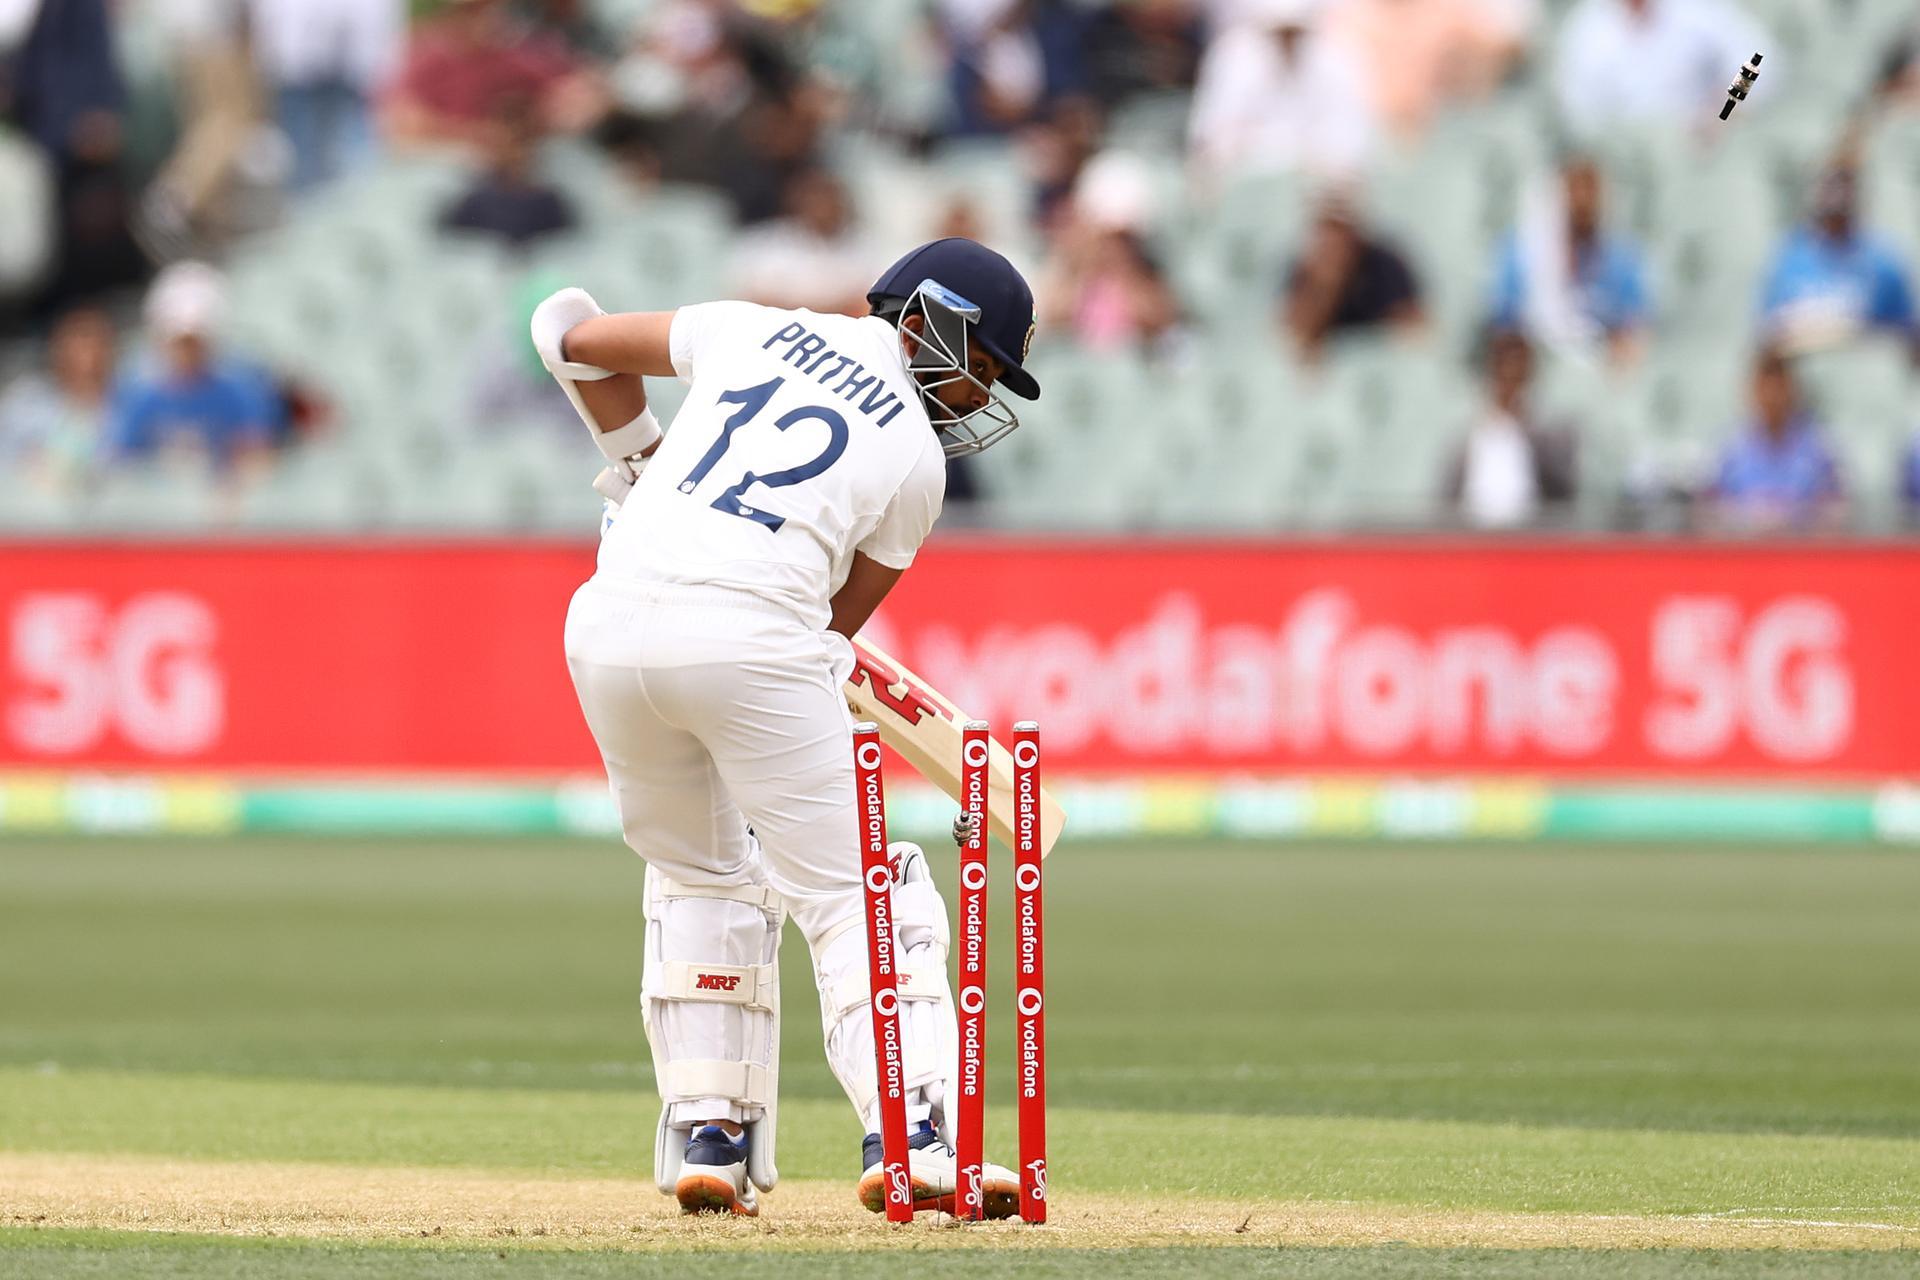 ADELAIDE, AUSTRALIA - DECEMBER 17: Prithvi Shaw of India is bowled by Mitchell Starc of Australia for a duck during day one of the First Test match between Australia and India at Adelaide Oval on December 17, 2020 in Adelaide, Australia. (Photo by Ryan Pierse/Getty Images)